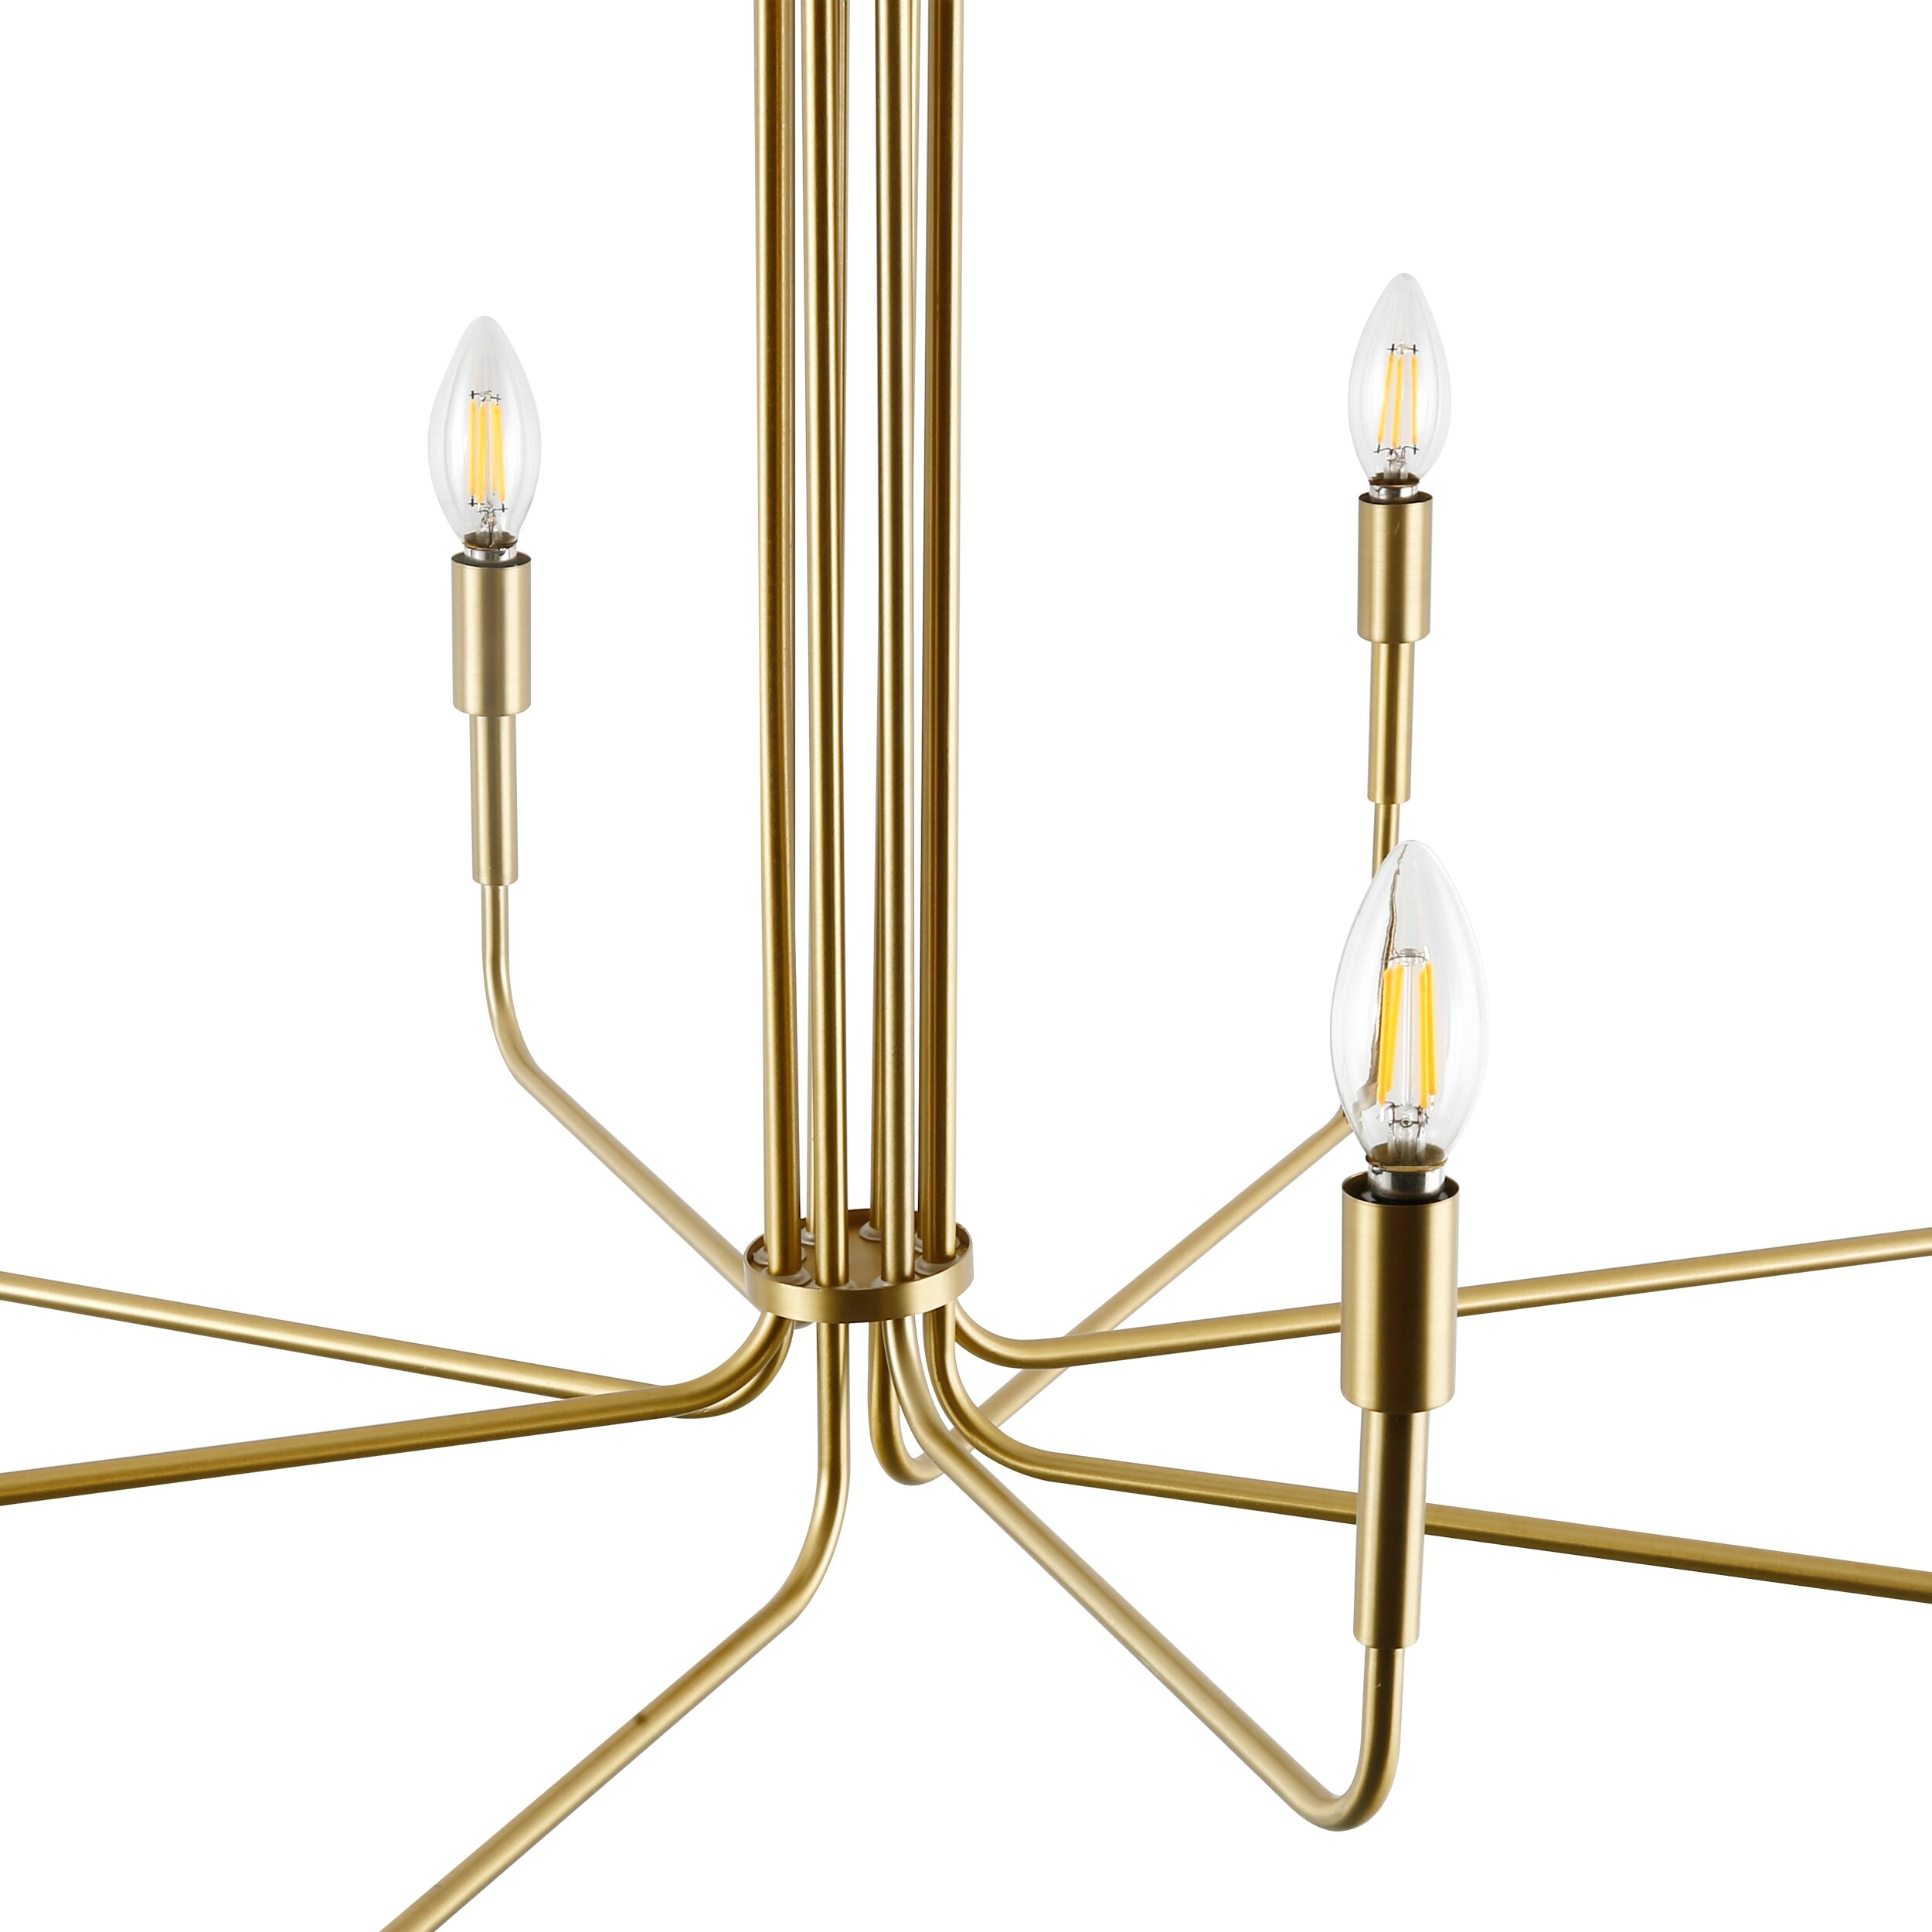 Brushed Brass Sola 8-Light Candle Style Modern Linear Chandelier, Brushed Brass - Image 6